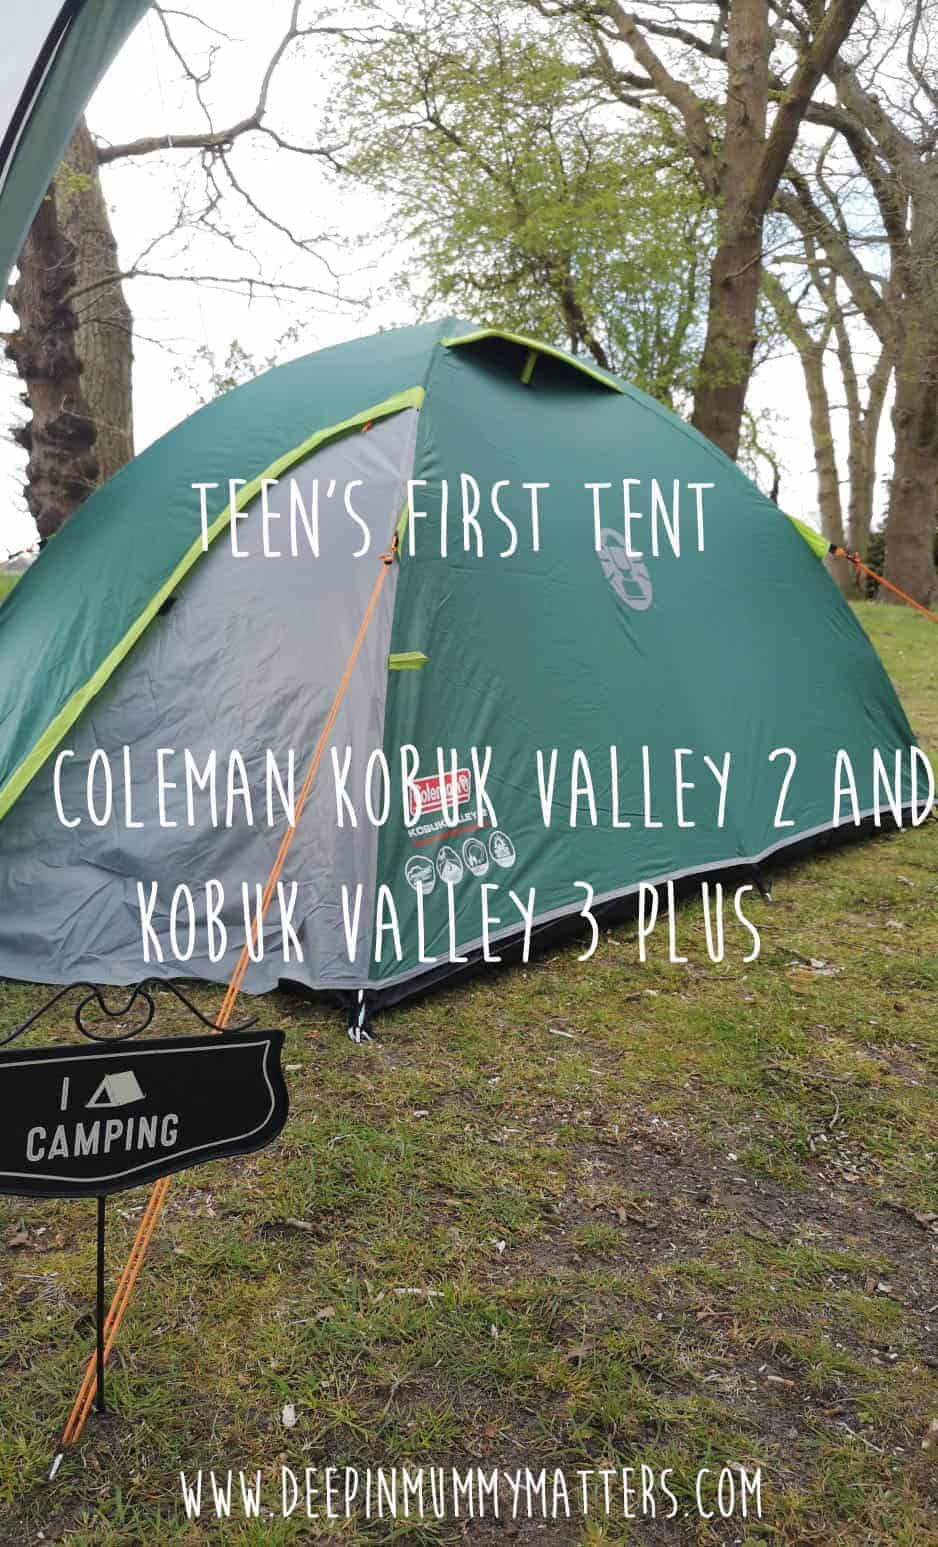 Teen's First Tent - Coleman Kobuk Valley 2 and Kobuk Valley 3 Plus 1